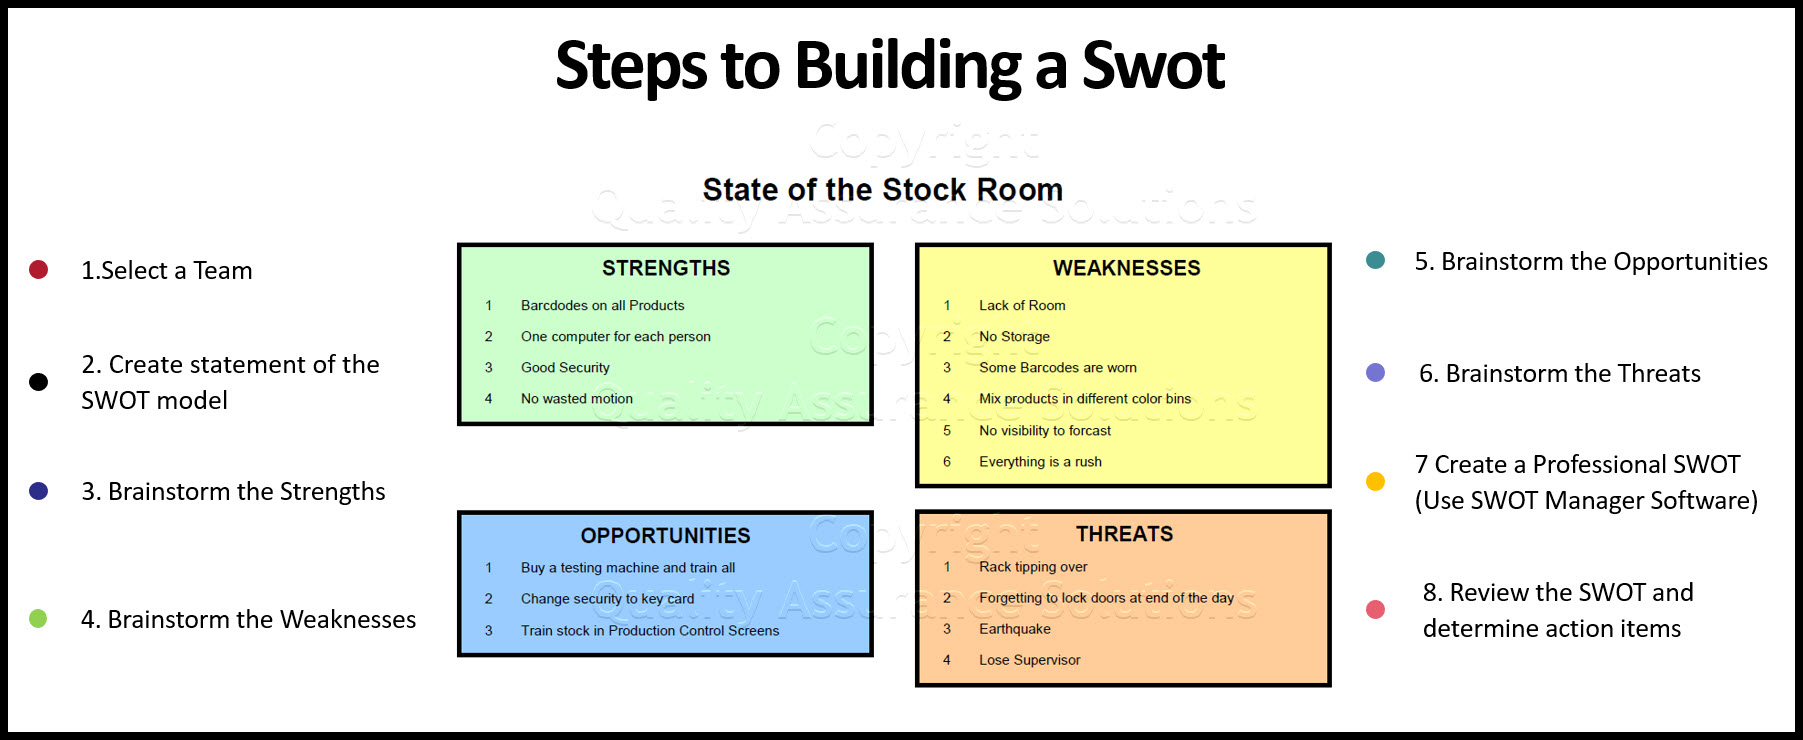 Step by Step instructions for applying the SWOT model and using SWOT techniques. Learn when to use SWOT reports and generate professional SWOT charts